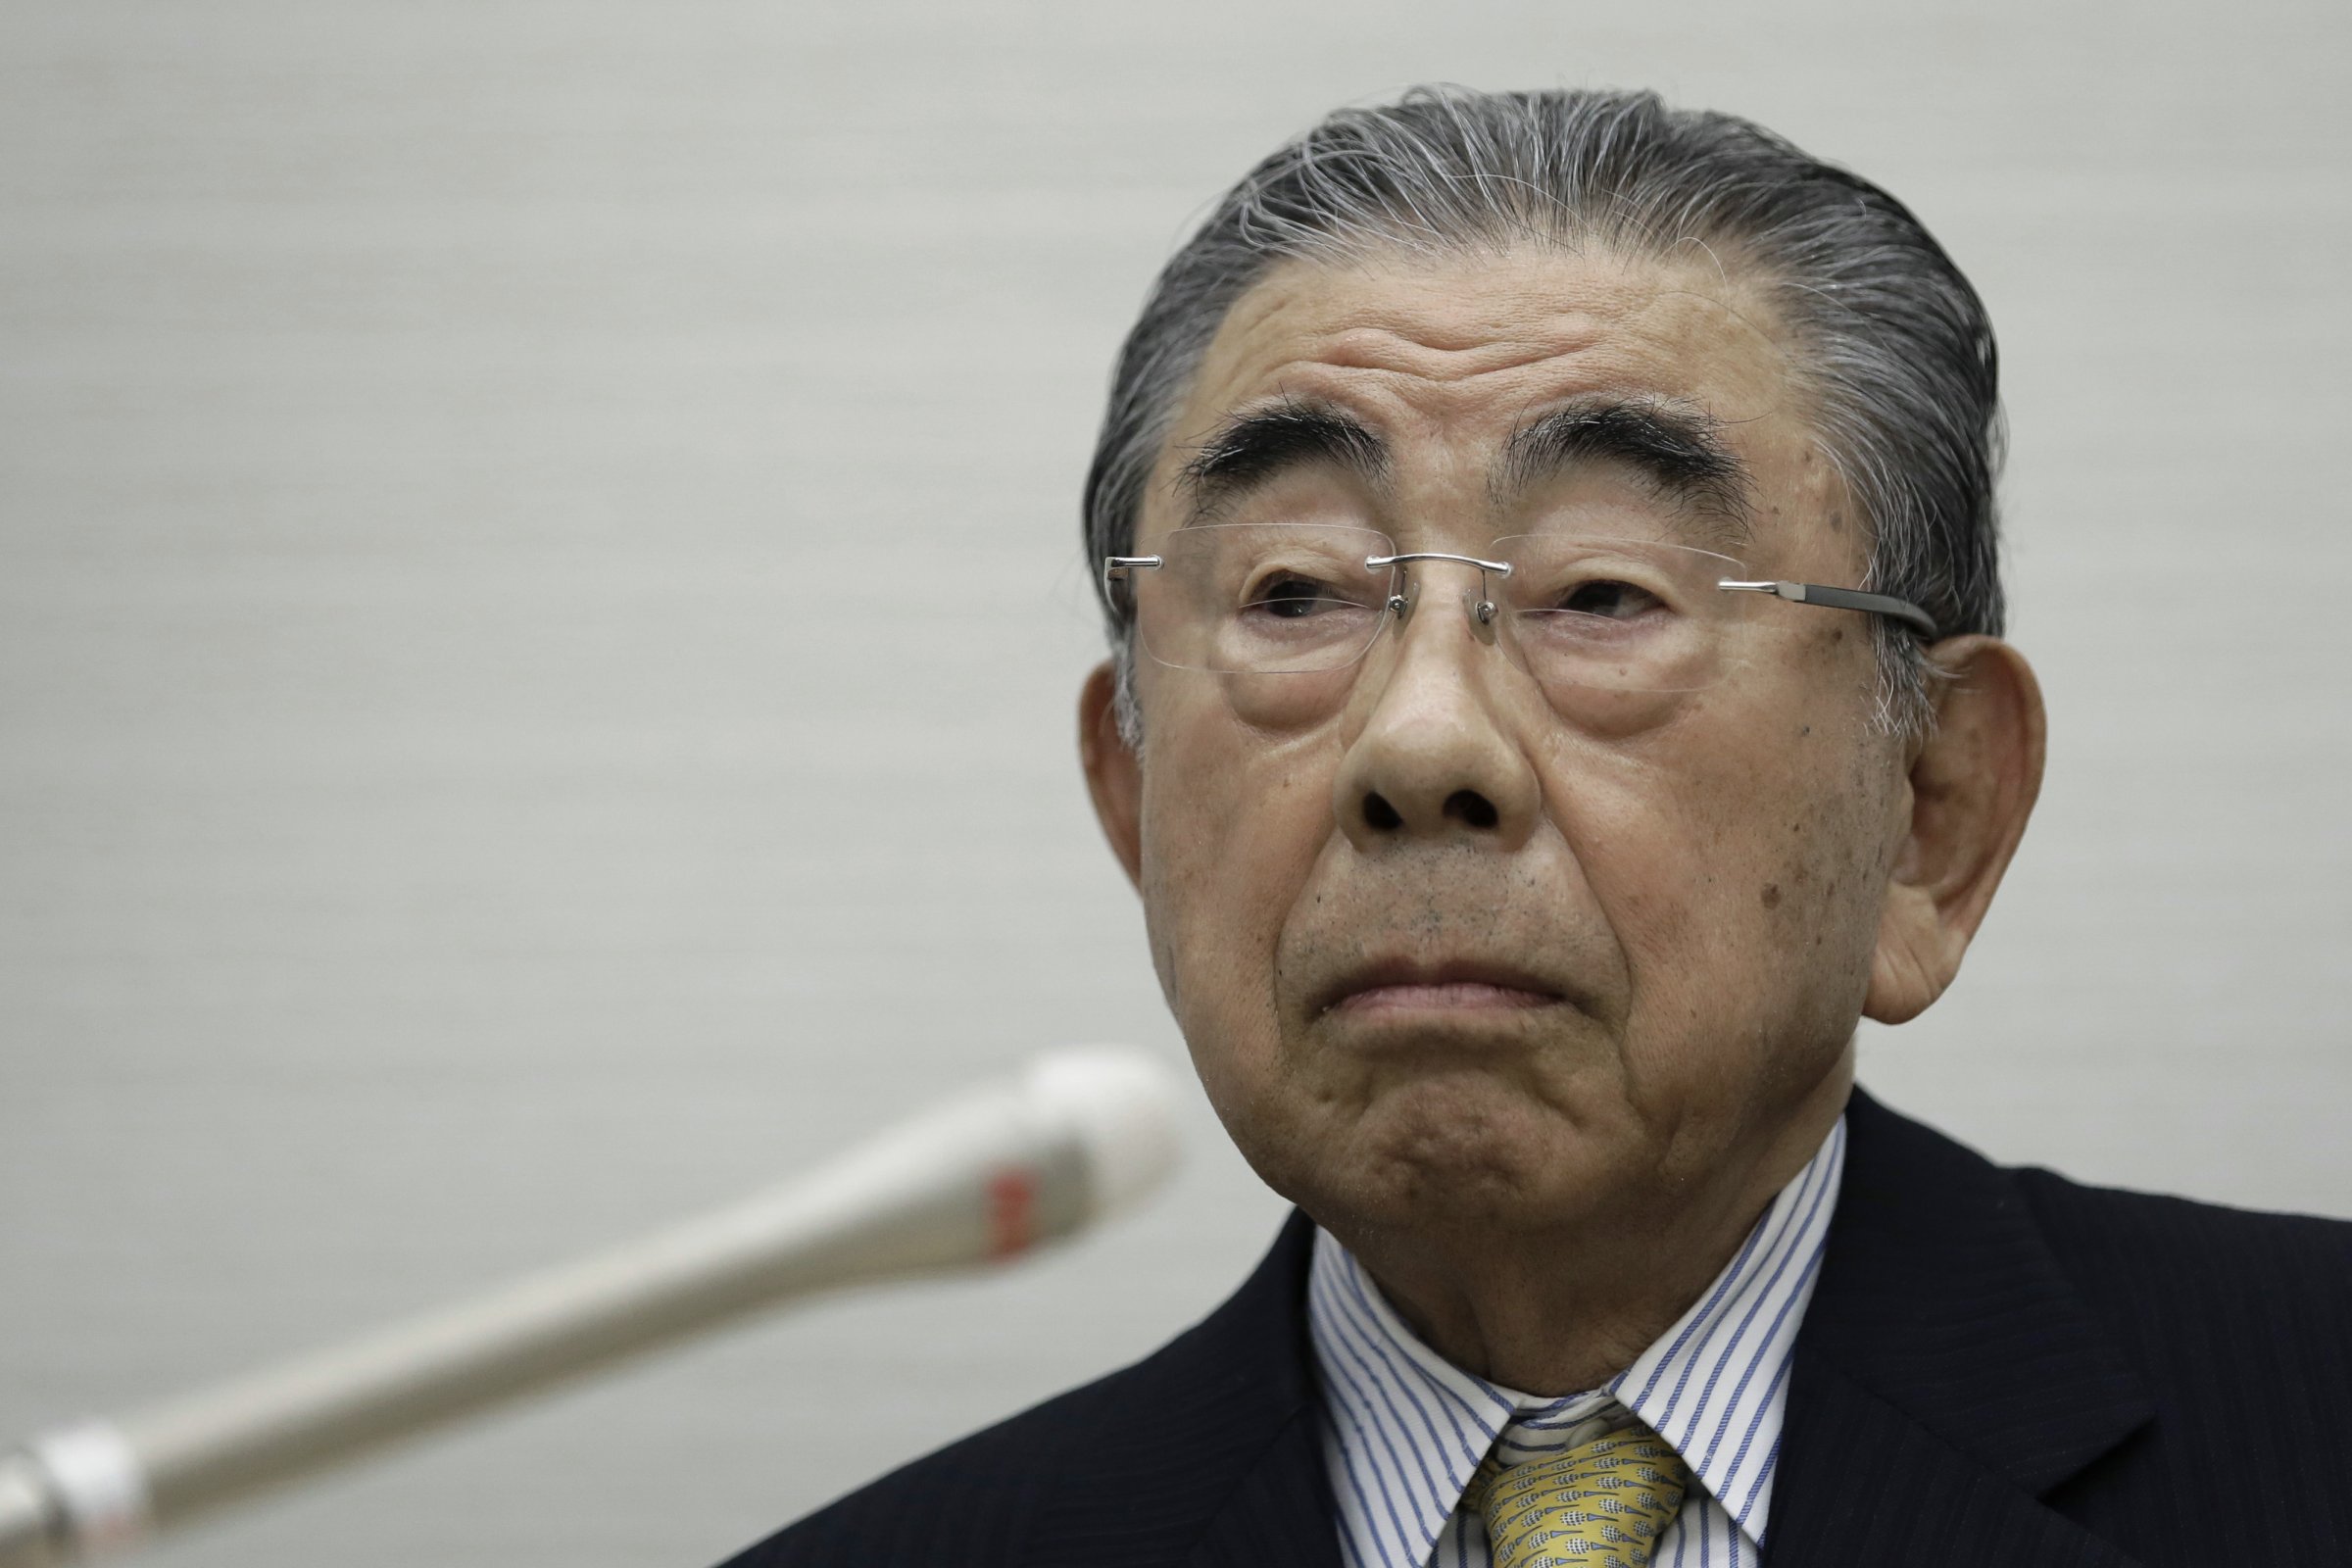 Toshifumi Suzuki, chairman and chief executive officer of Seven & I Holdings Co., pauses during a news conference in Tokyo, Japan, on Thursday, April 7, 2016.